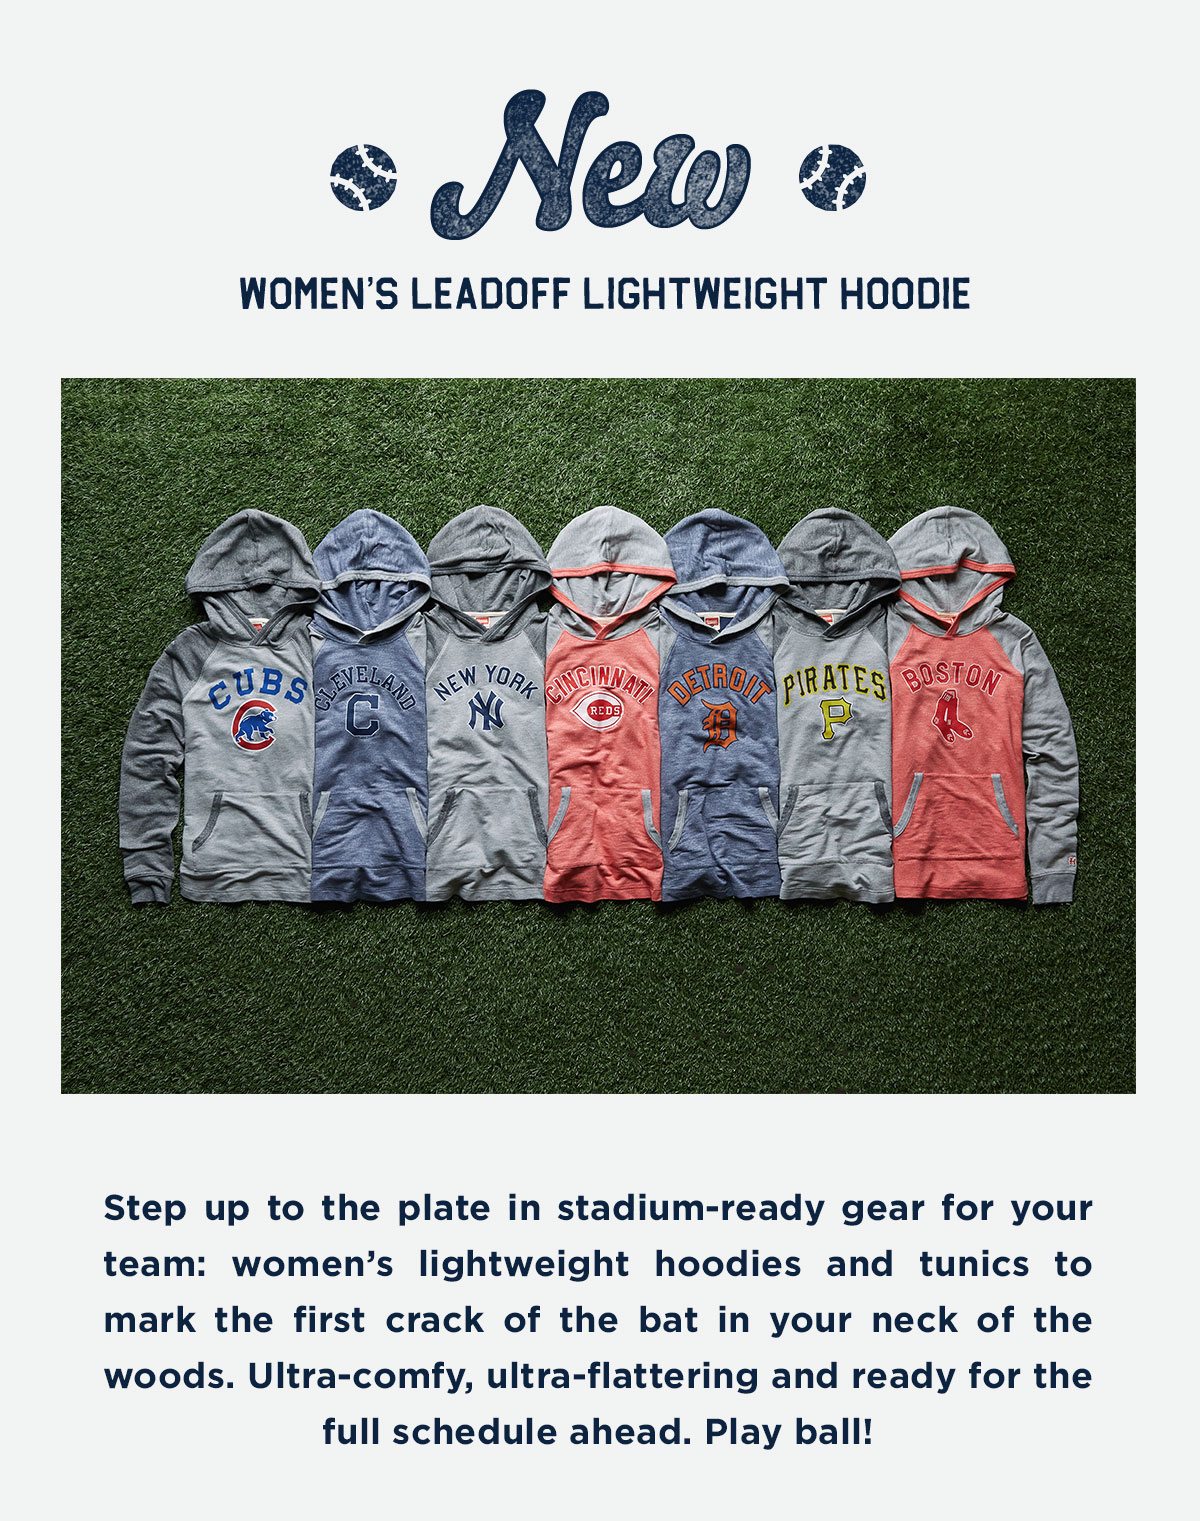 Step up to the plate in stadium-ready gear for your team: women’s lightweight hoodies and tunics to mark the first crack of the bat in your neck of the woods. Ultra-comfy, ultra-flattering and ready for the full schedule ahead. Play ball!